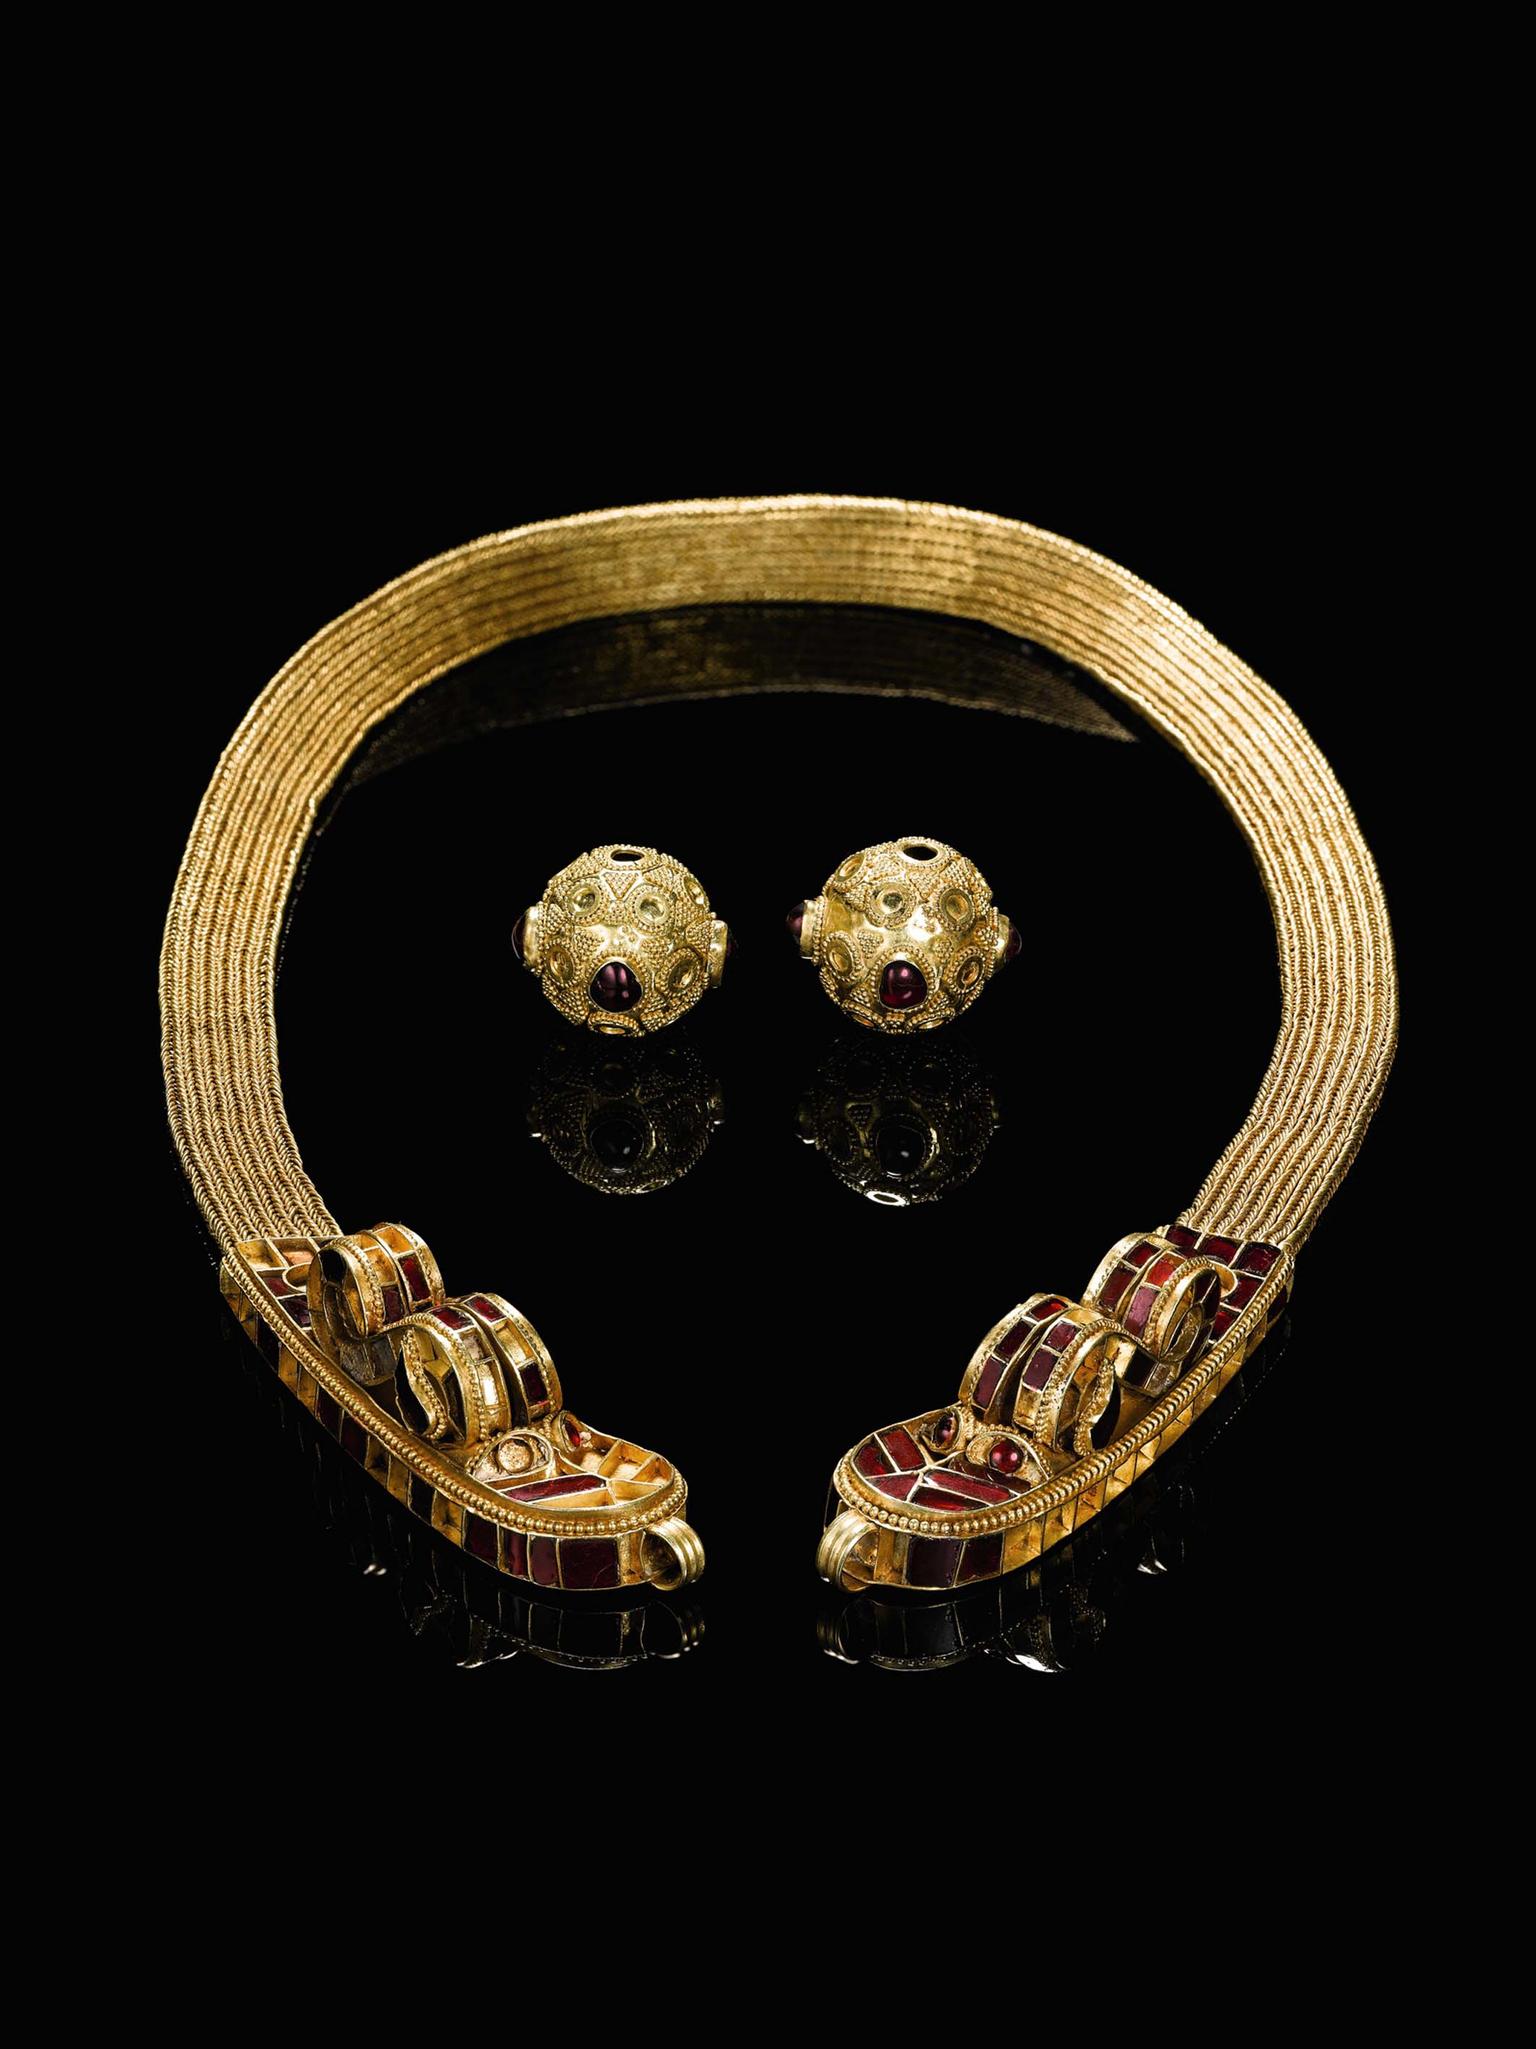 Made from woven gold and set with garnet stones, the opulent gold collar that will go under the hammer at Sotheby's London next week presents a different facet of the Western image of Attila and his Huns as ruthless barbarians.